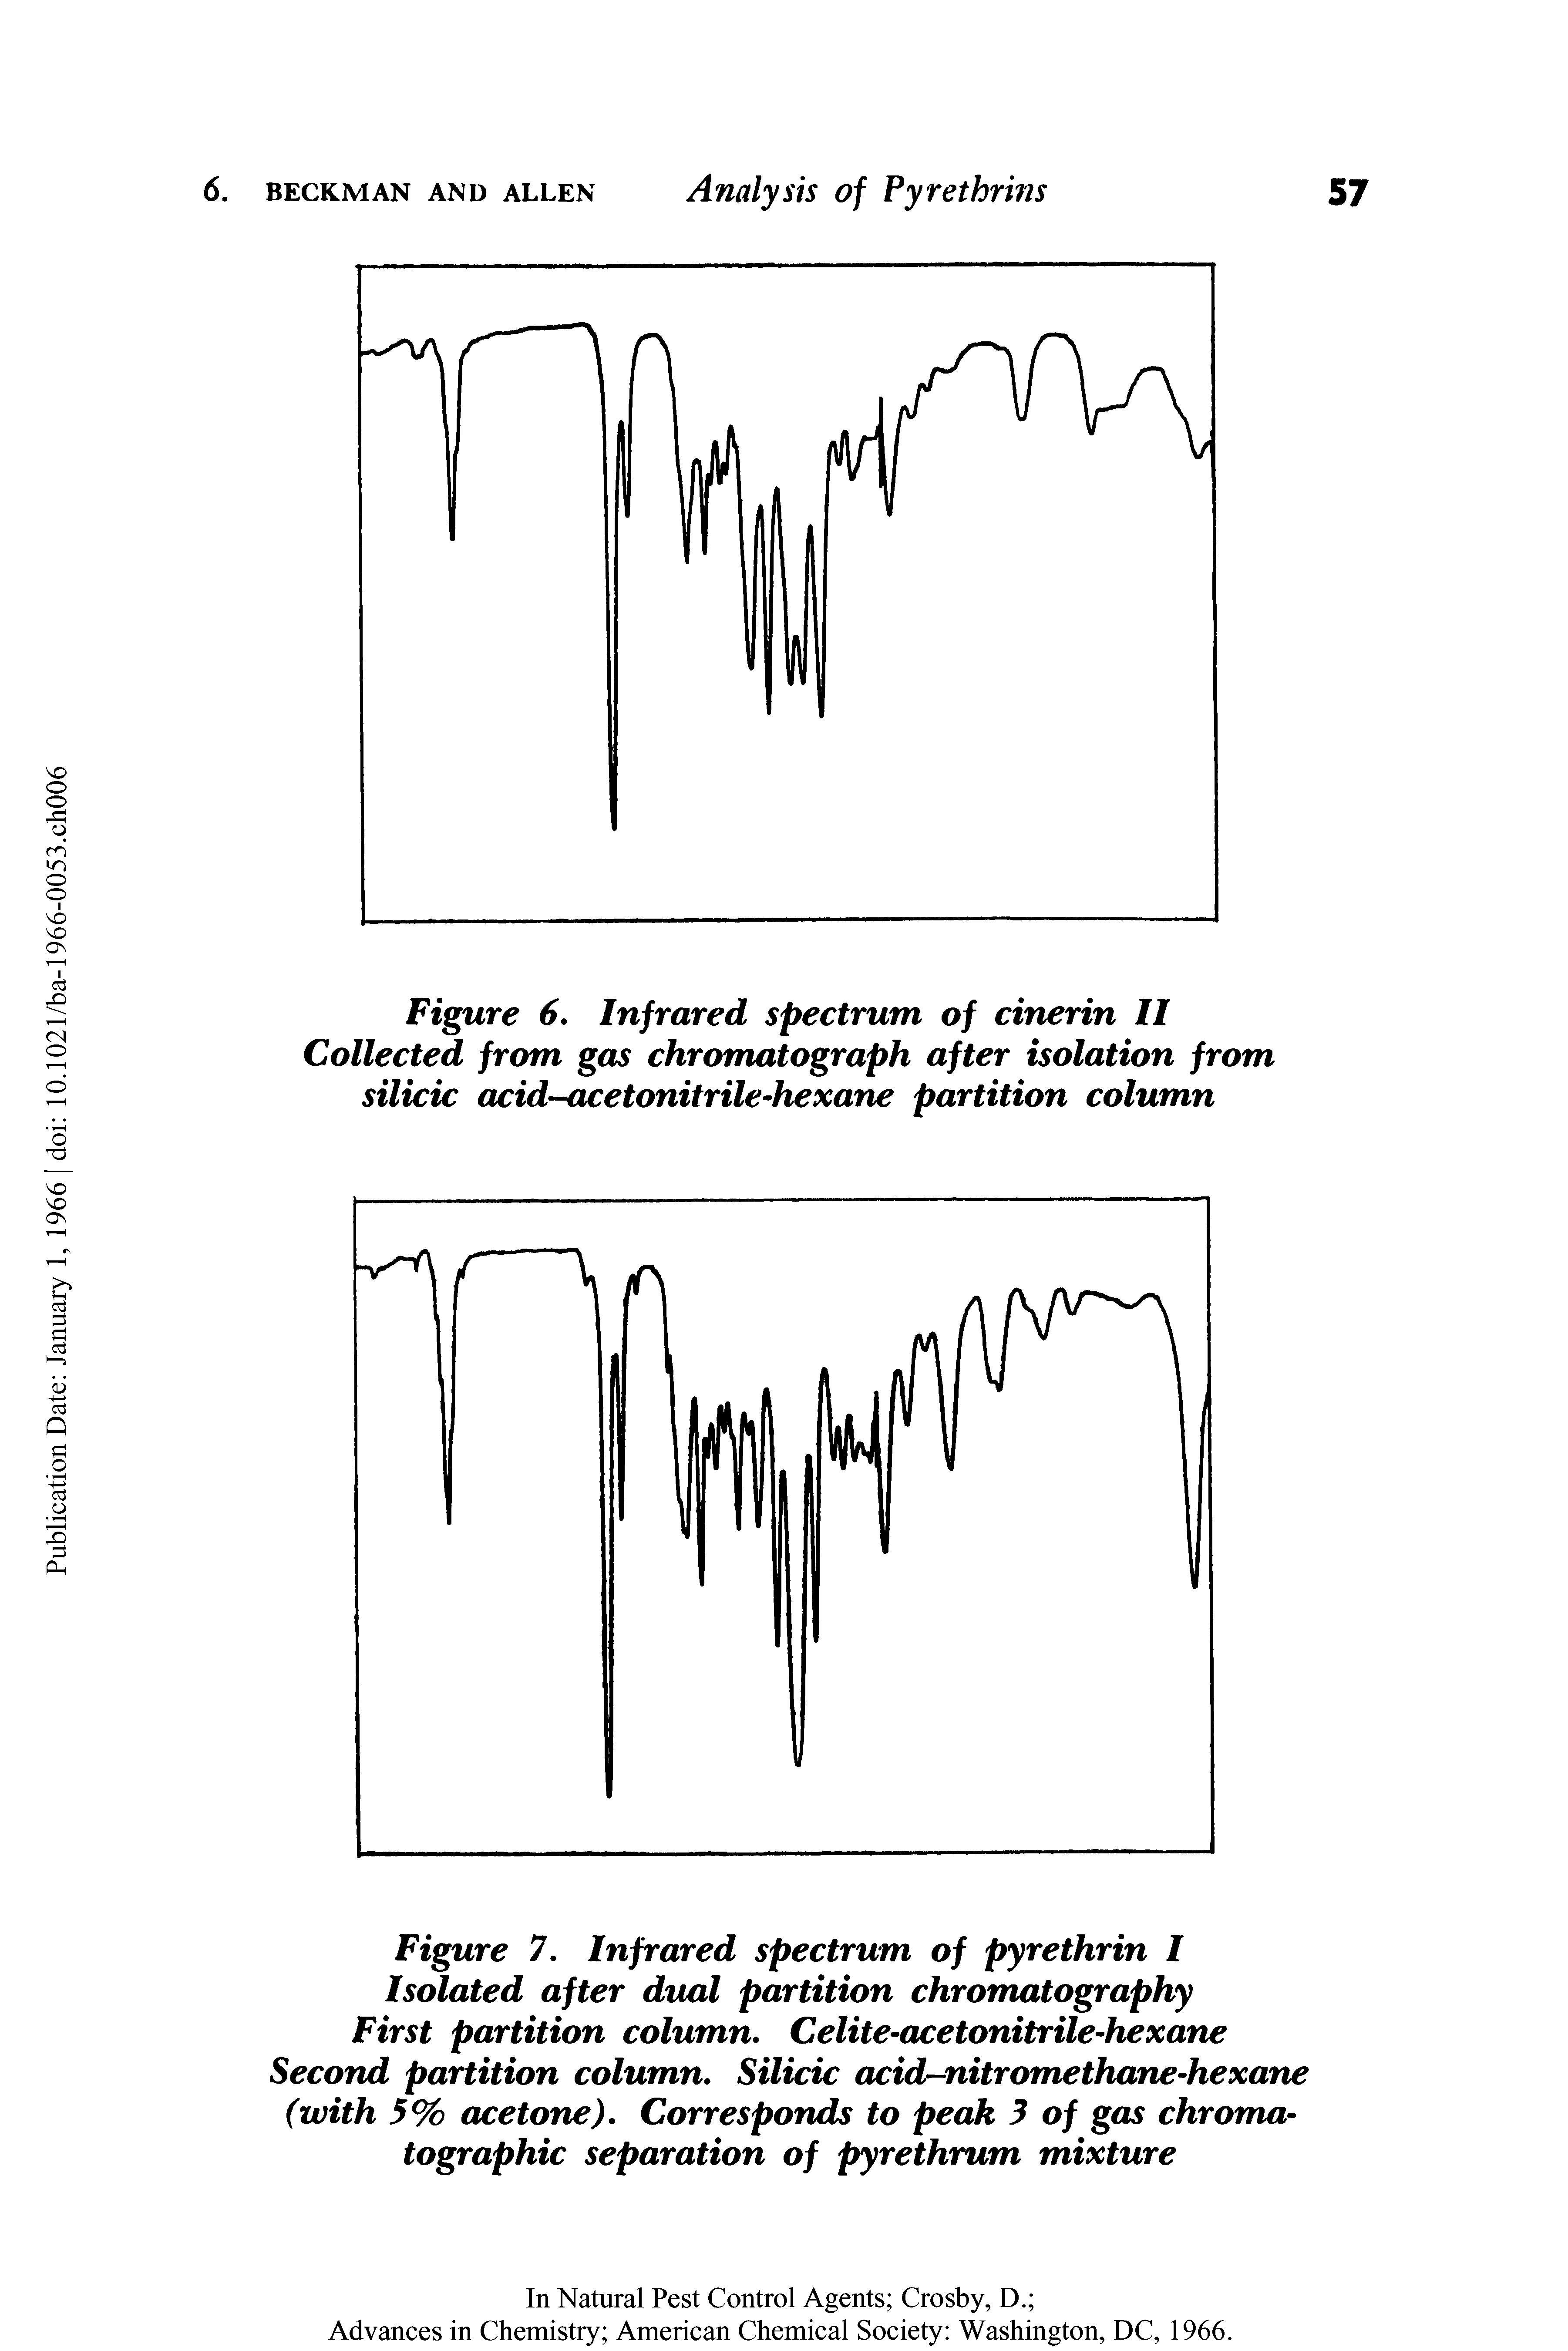 Figure 7. Infrared spectrum of pyrethrin I Isolated after dual partition chromatography First partition column. Celite-acetonitrile-hexane Second partition column. Silicic acid-nitromethane-hexane (with 5% acetone). Corresponds to peak 3 of gas chromatographic separation of pyrethrum mixture...